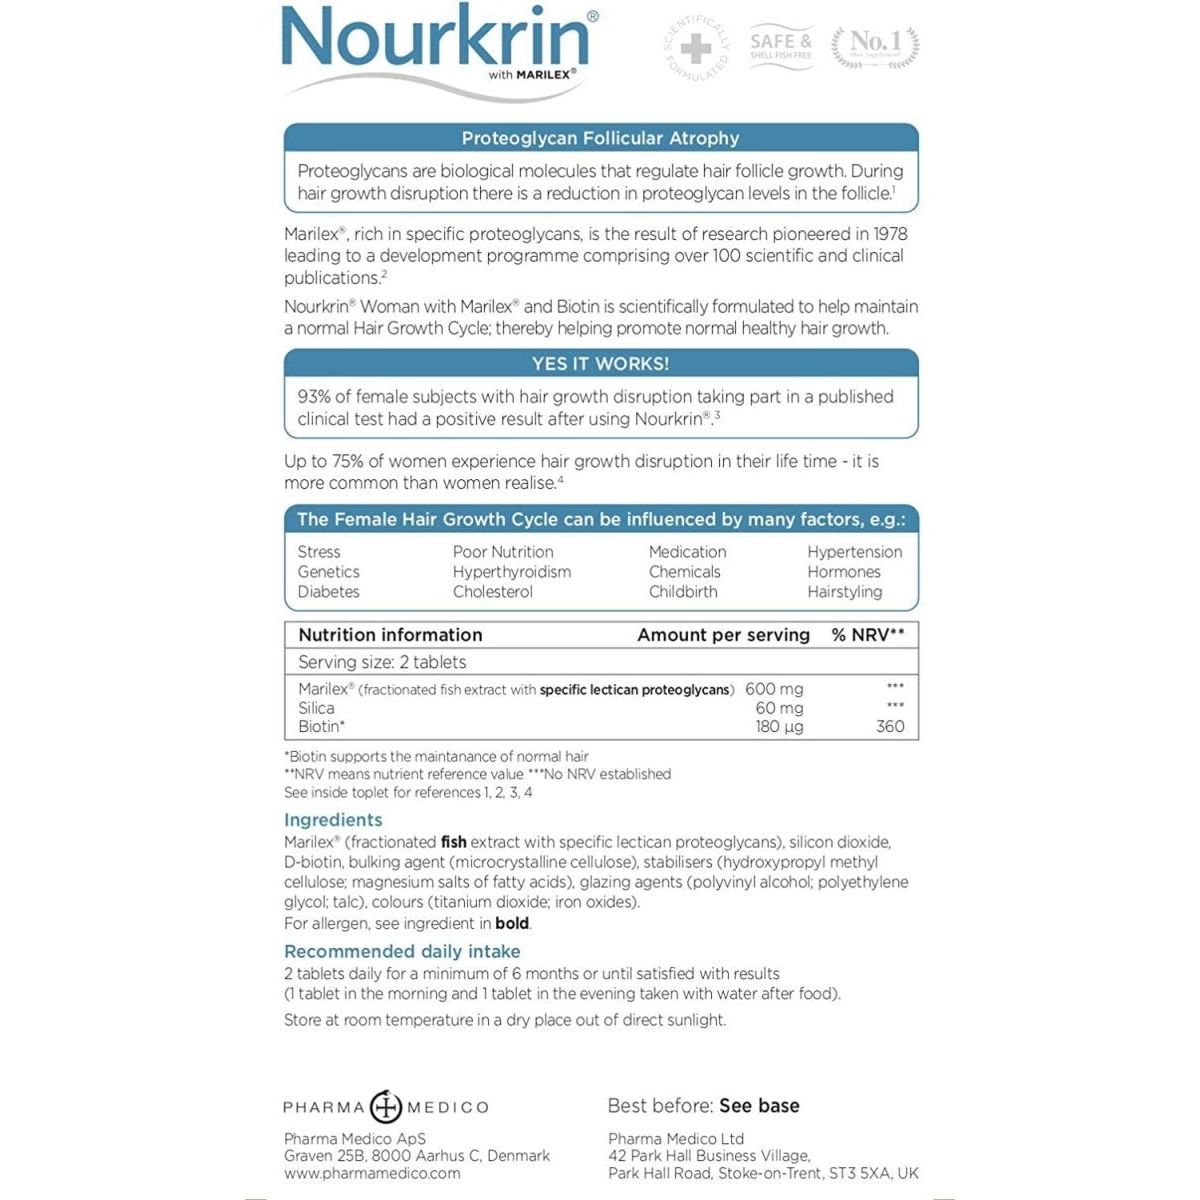 Nourkrin Woman Hair Supplement - 180 Tablets, 3 Month Supply